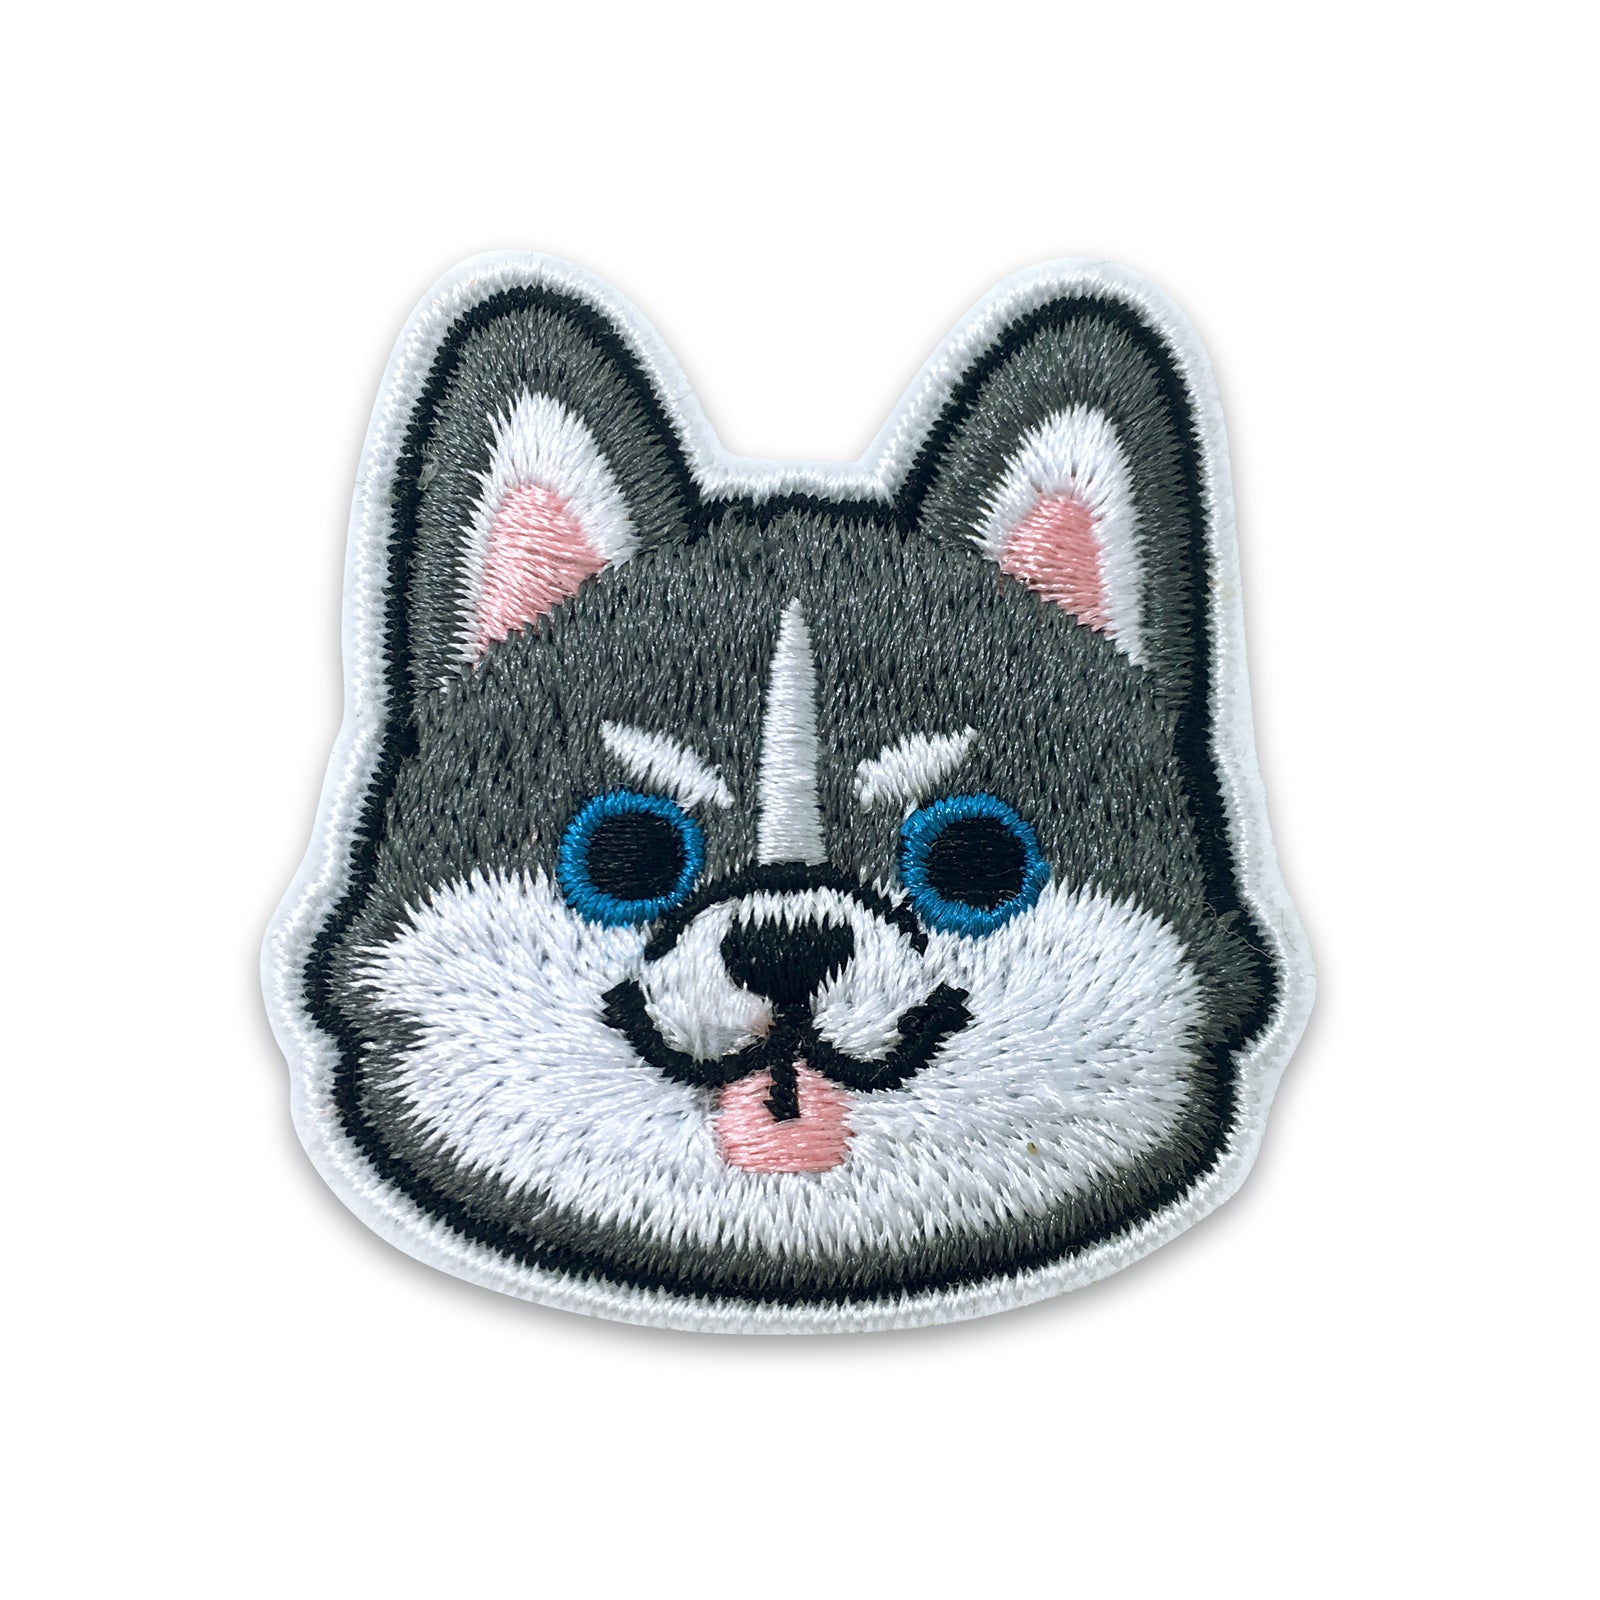 Corgi/Dachshund/Husky Patch Embroidery Patches for Clothing,Cute Animal Apparel Decoration Iron-On Patches Appliques Sewing Fabric(H)